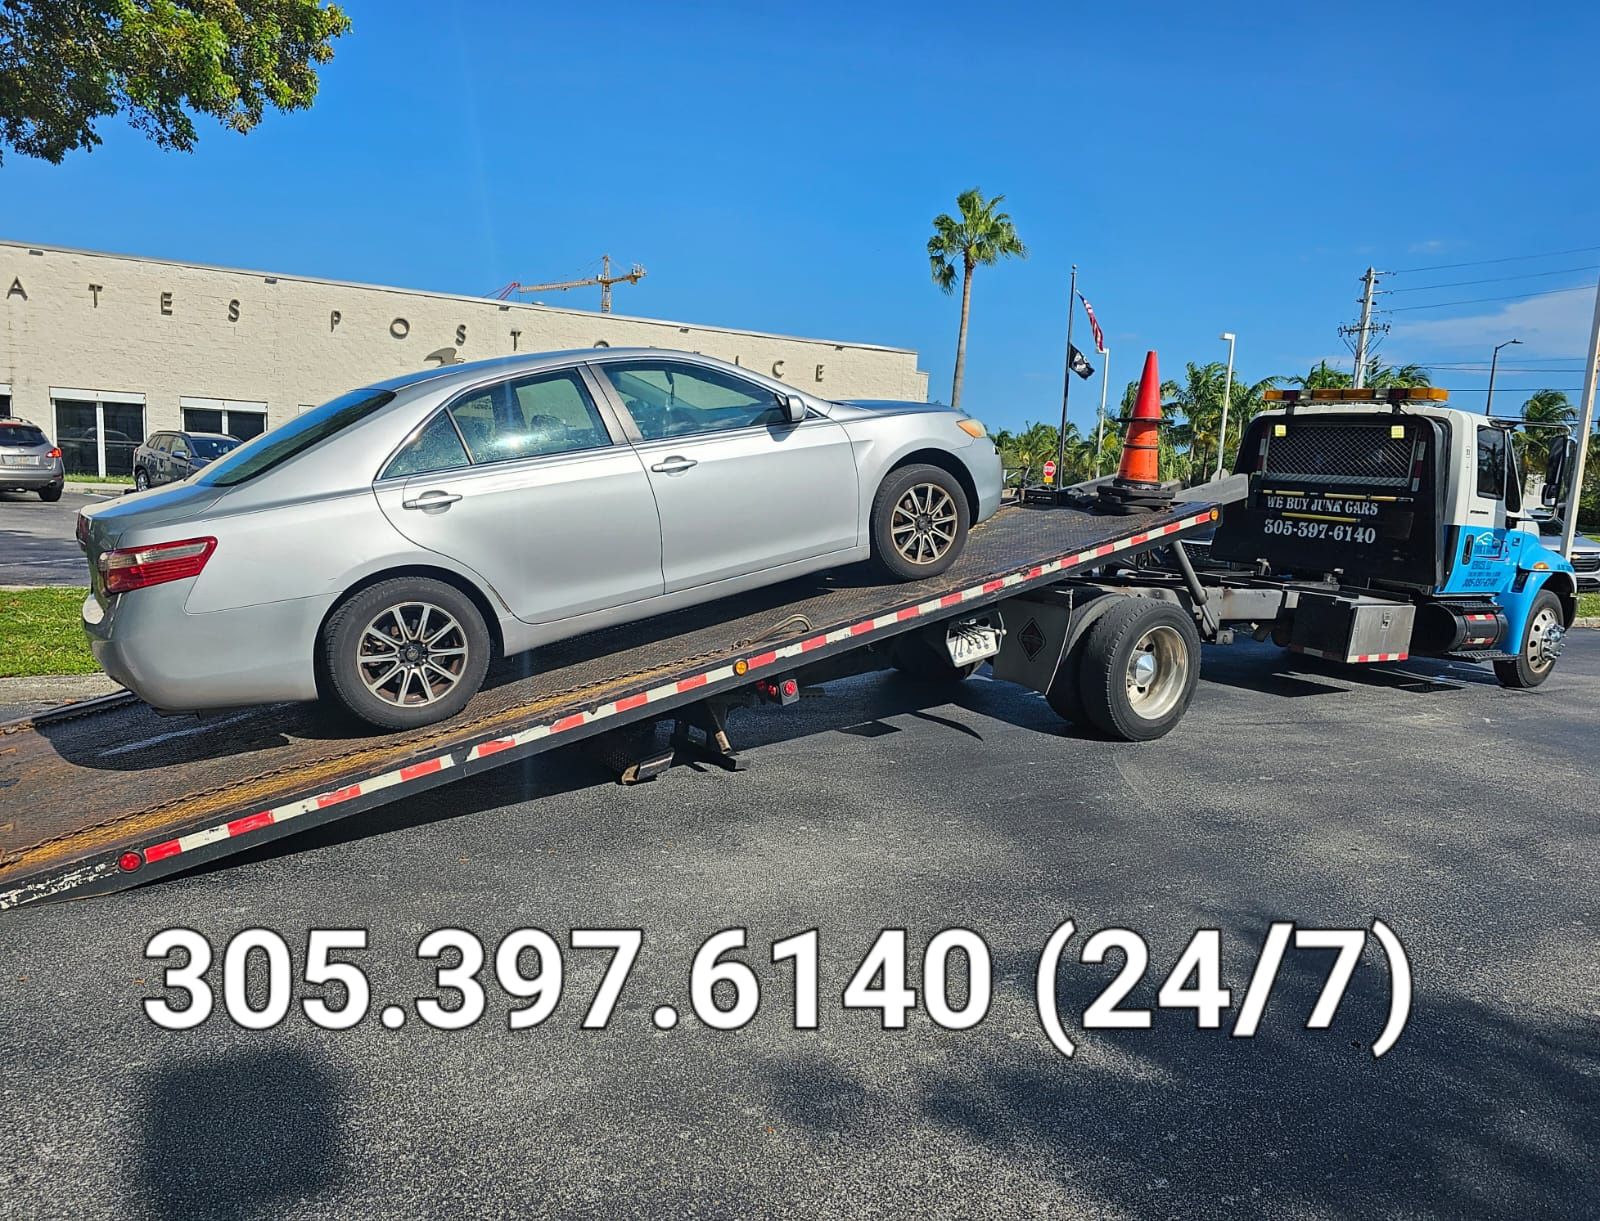 Miami Towing Truck Flatbed 